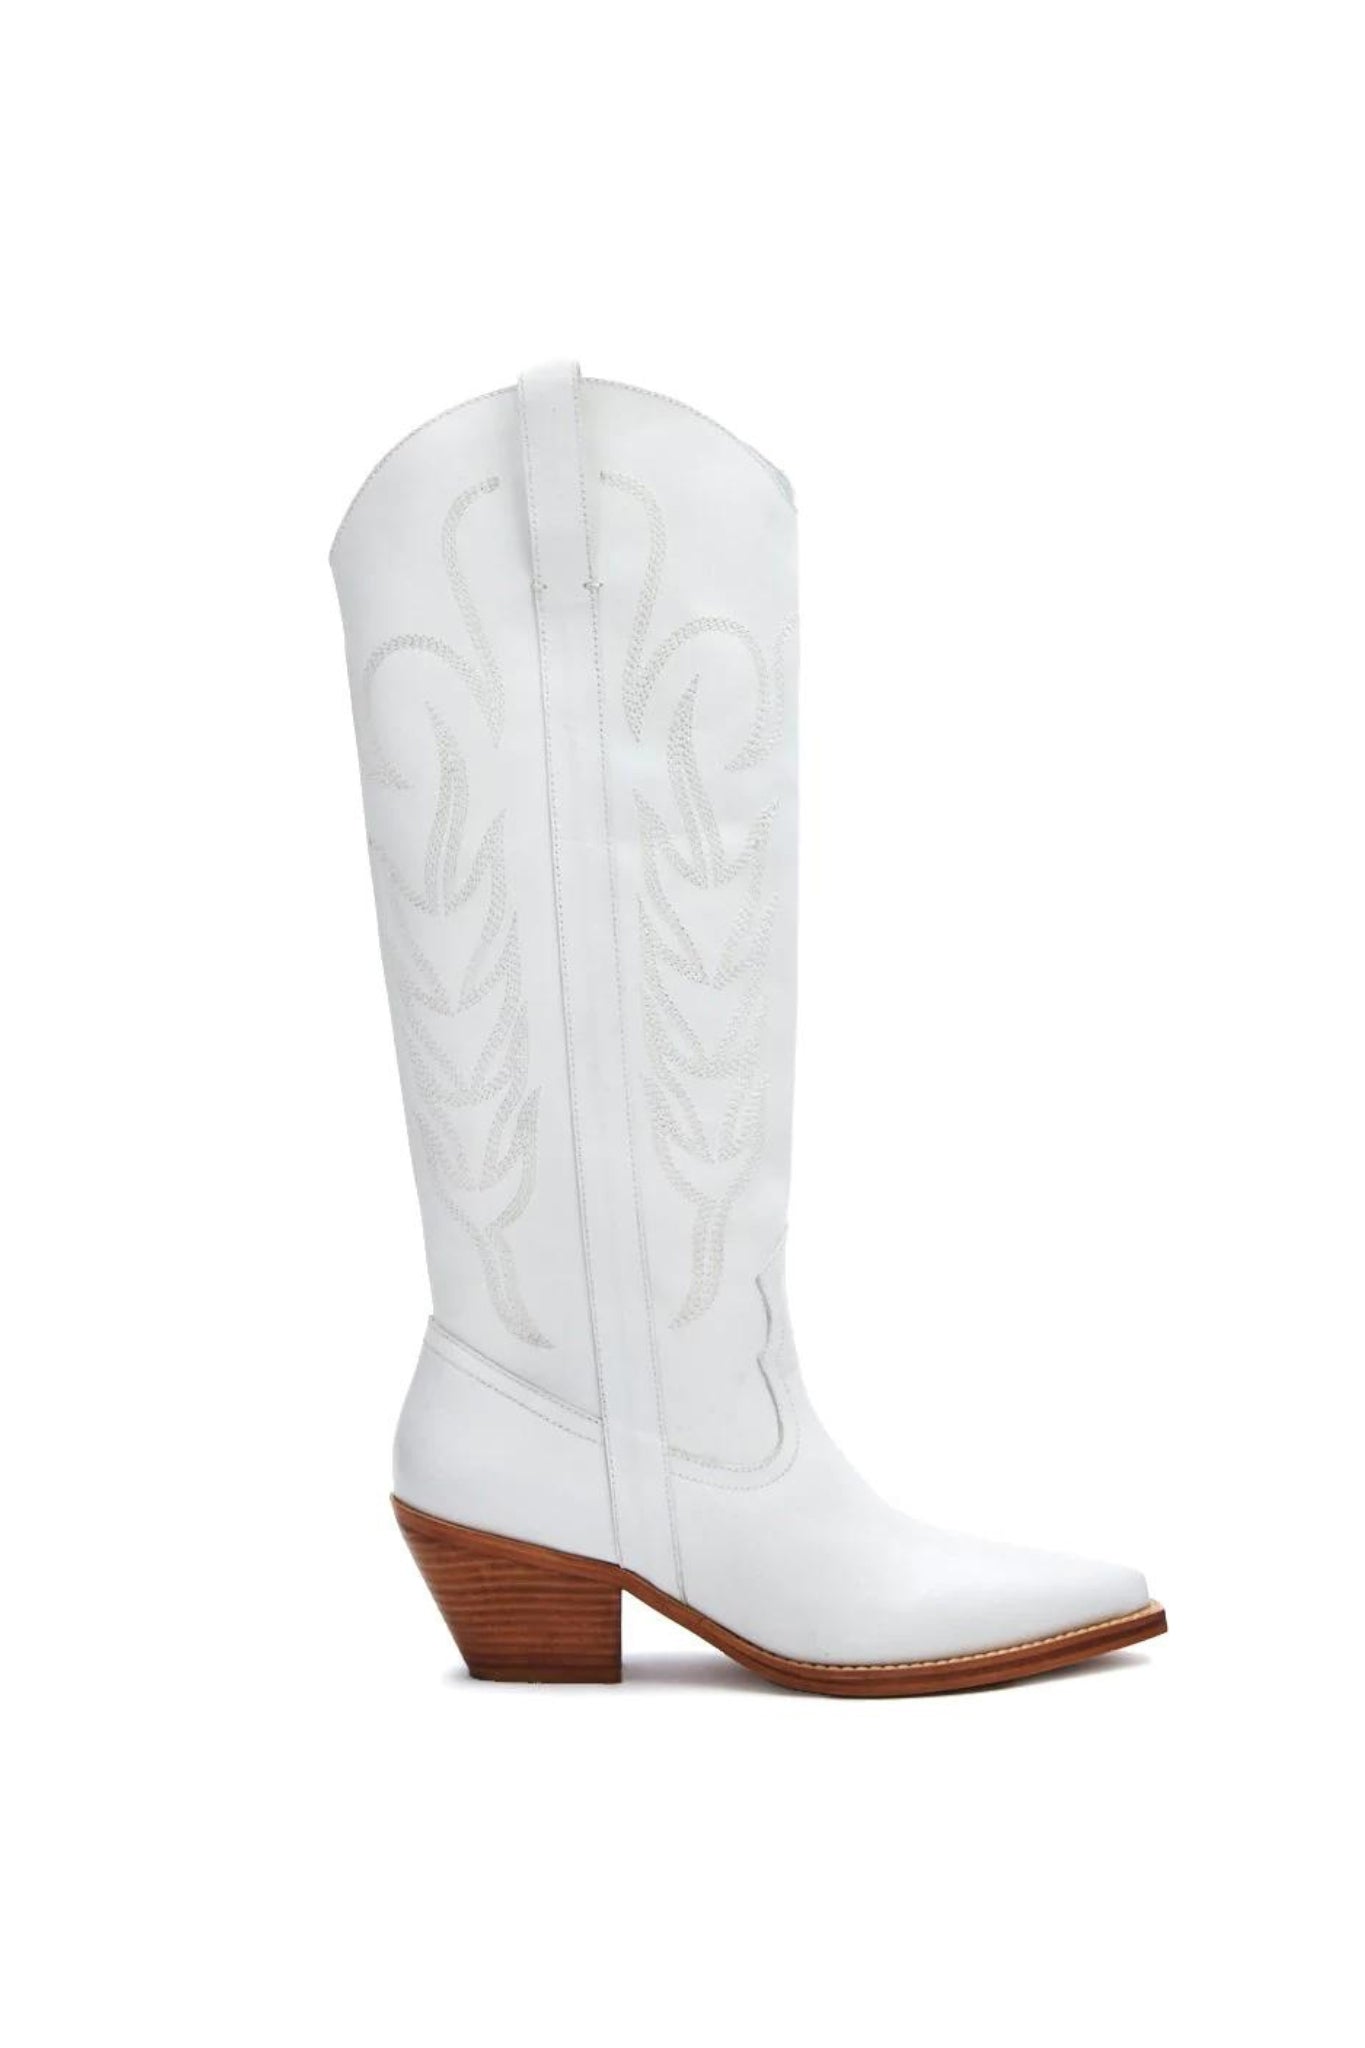 View 2 of Matisse Agency Cowboy Boot, a Shoes from Larrea Cove. Detail: .